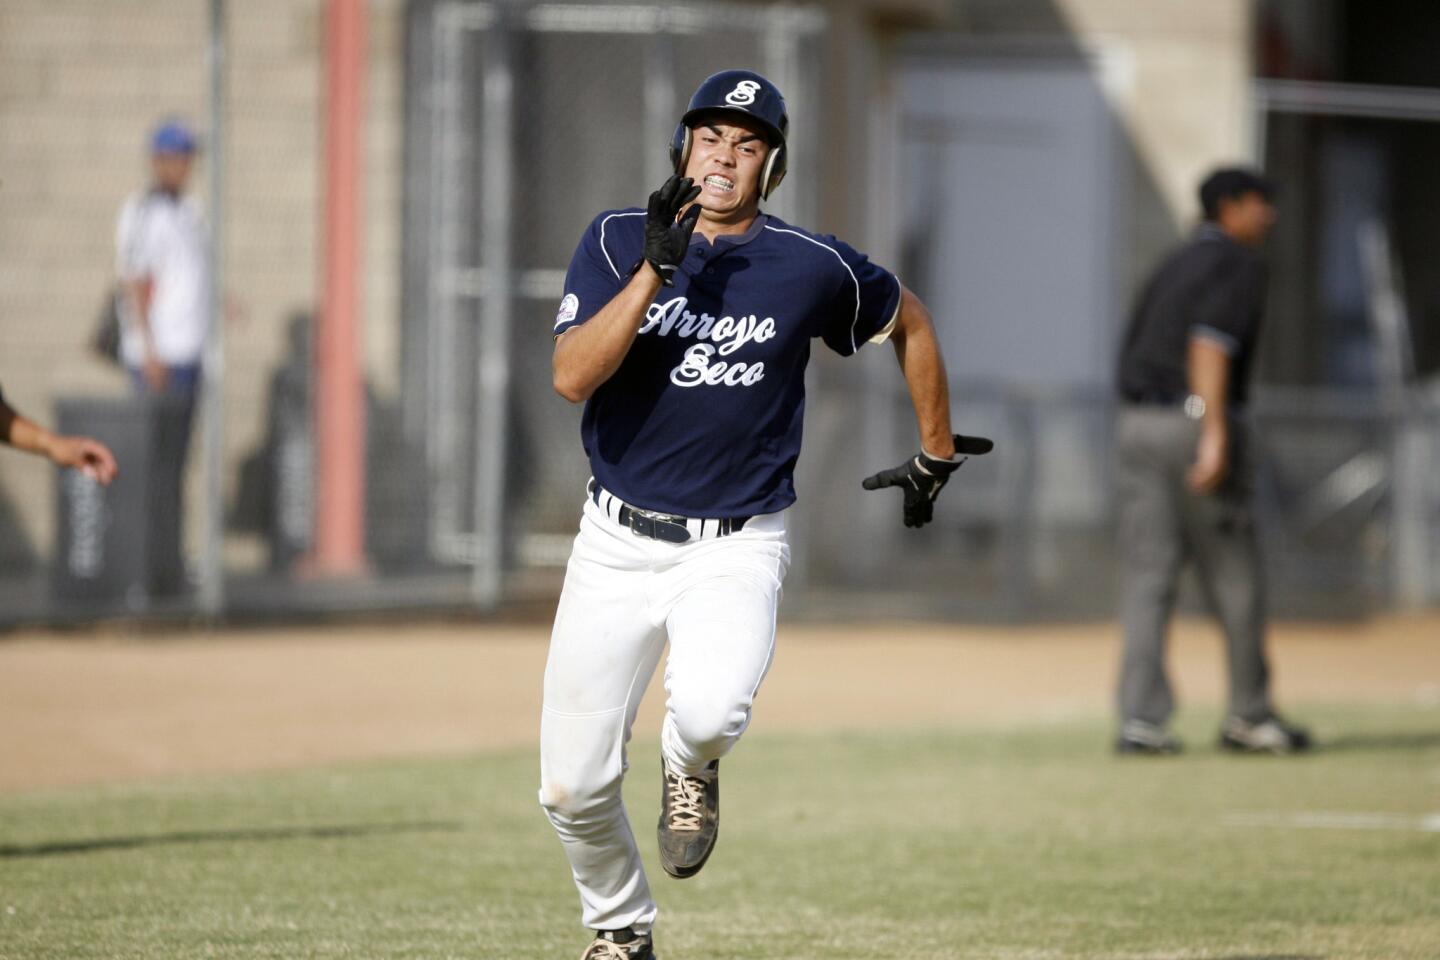 Arroyo Seco's Tei Vanderford makes a run during a game against Puerto Rico, which took place at Major League Baseball Urban Youth Academy in Compton on Thursday, August 3, 2012.